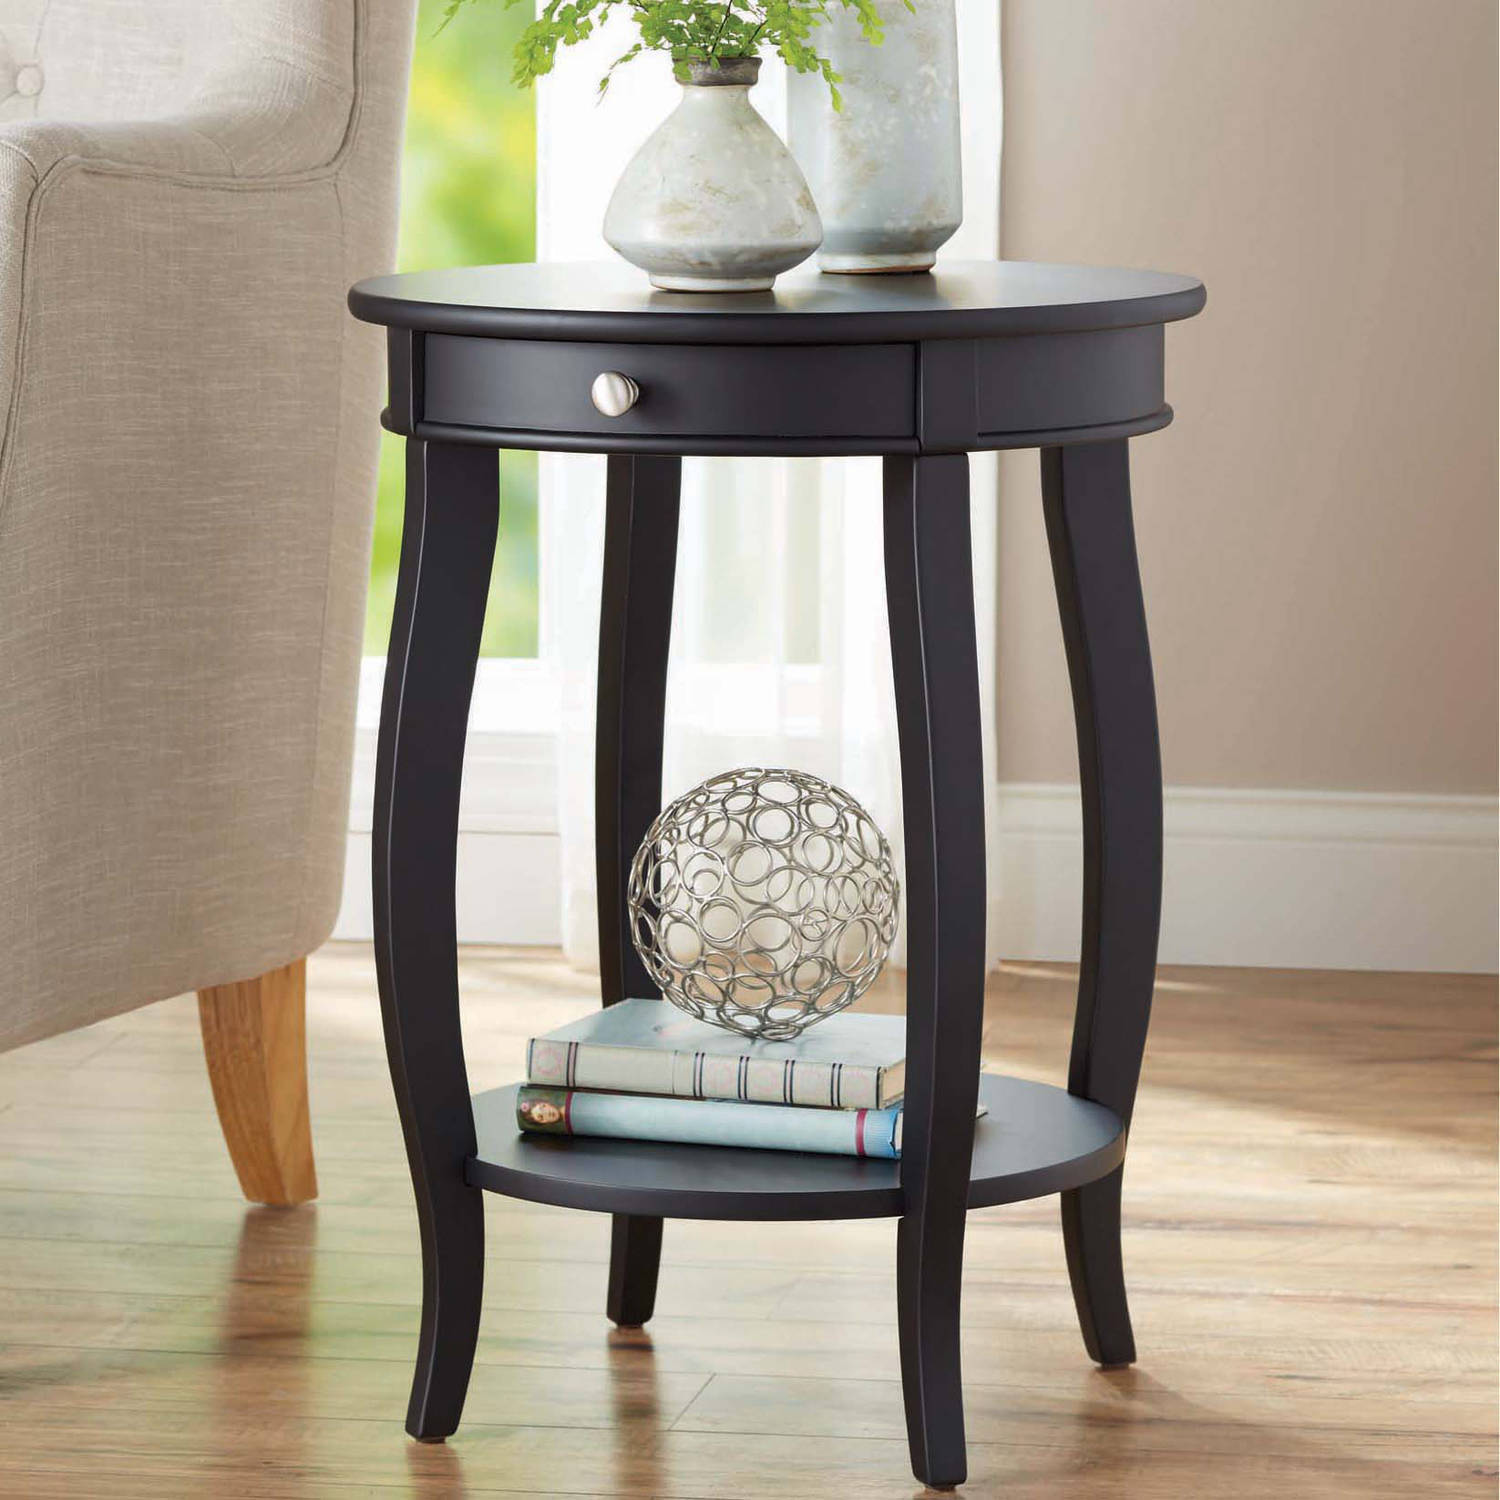 better homes gardens round accent table with drawer multiple small gray colors pottery barn cart coffee metal garden mango nest tables kitchen wine cabinet silver glass set